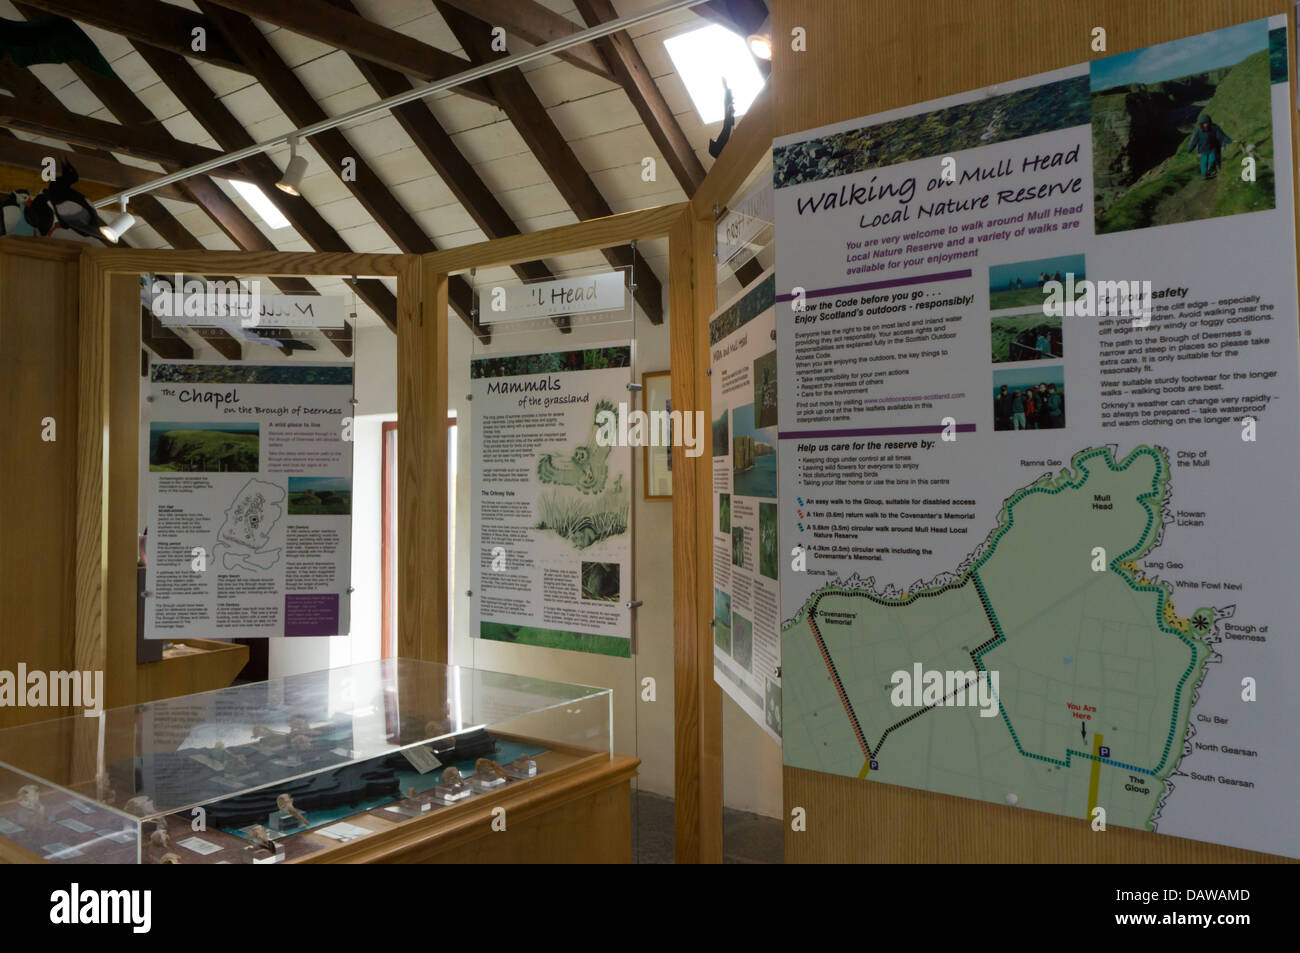 The Mull Head Local Nature Reserve visitor centre on Deerness, Mainland Orkney. Stock Photo